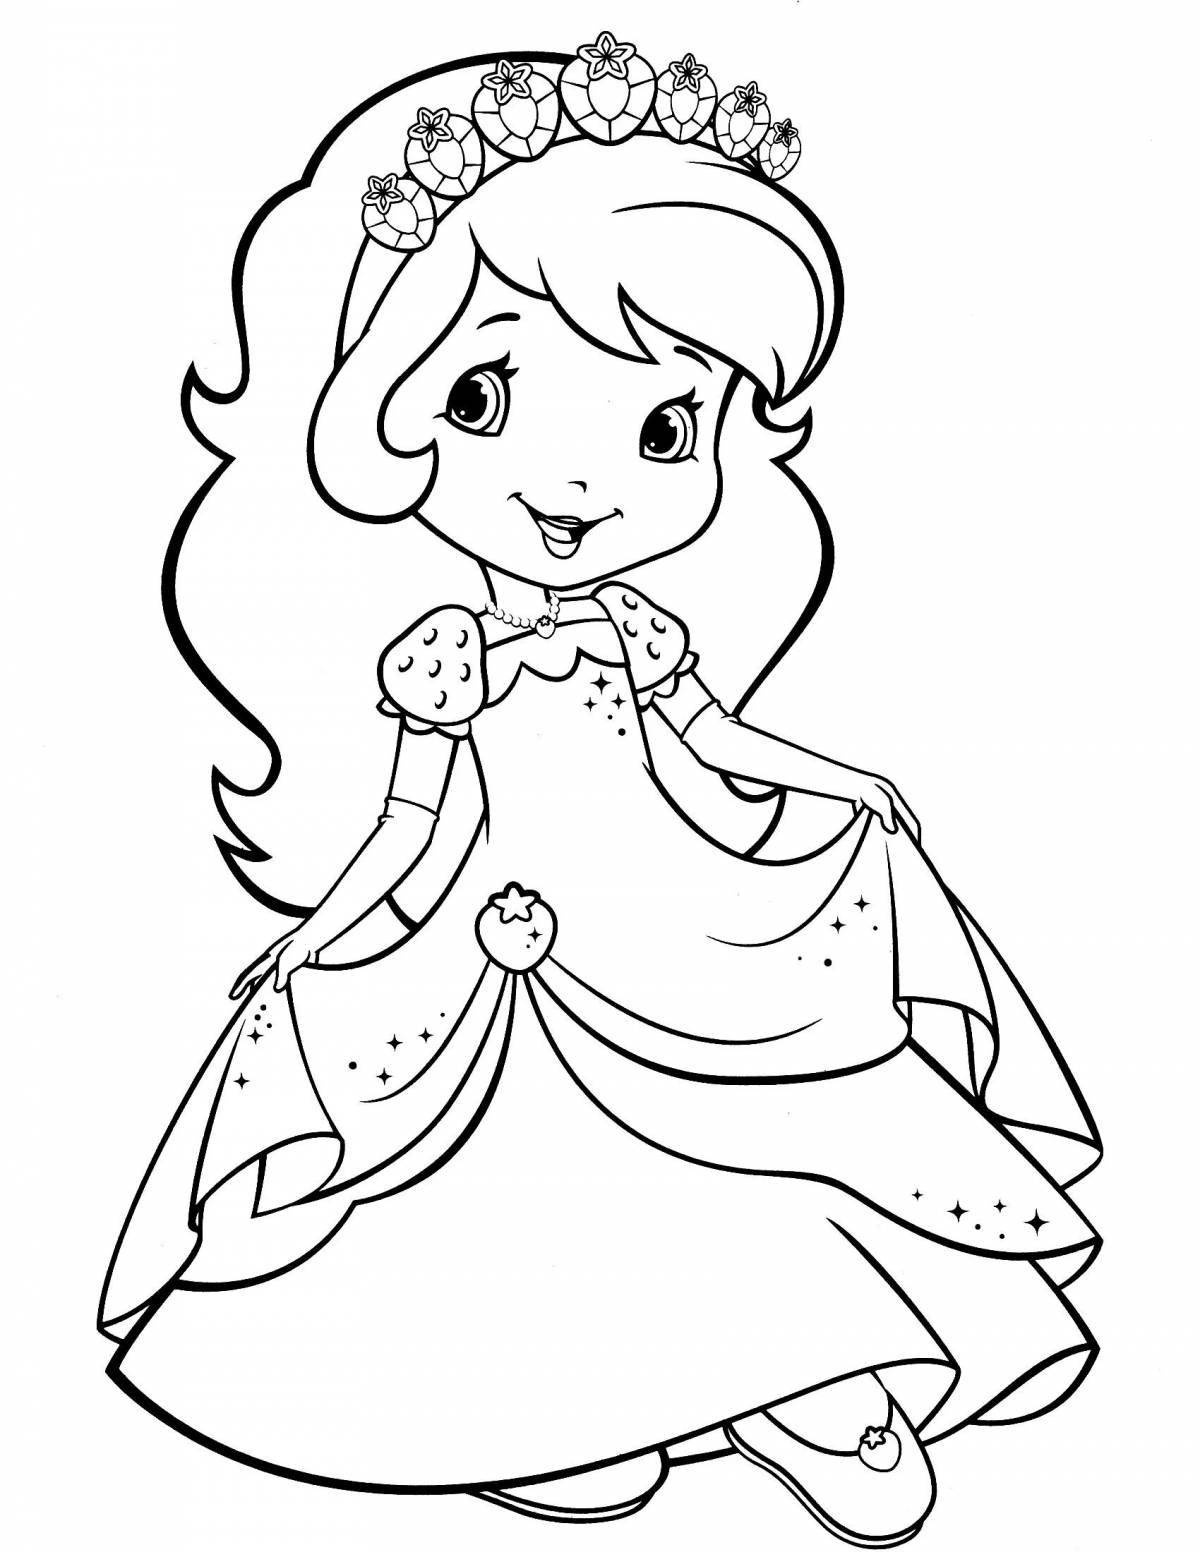 Gorgeous coloring of princesses 4-5 years old